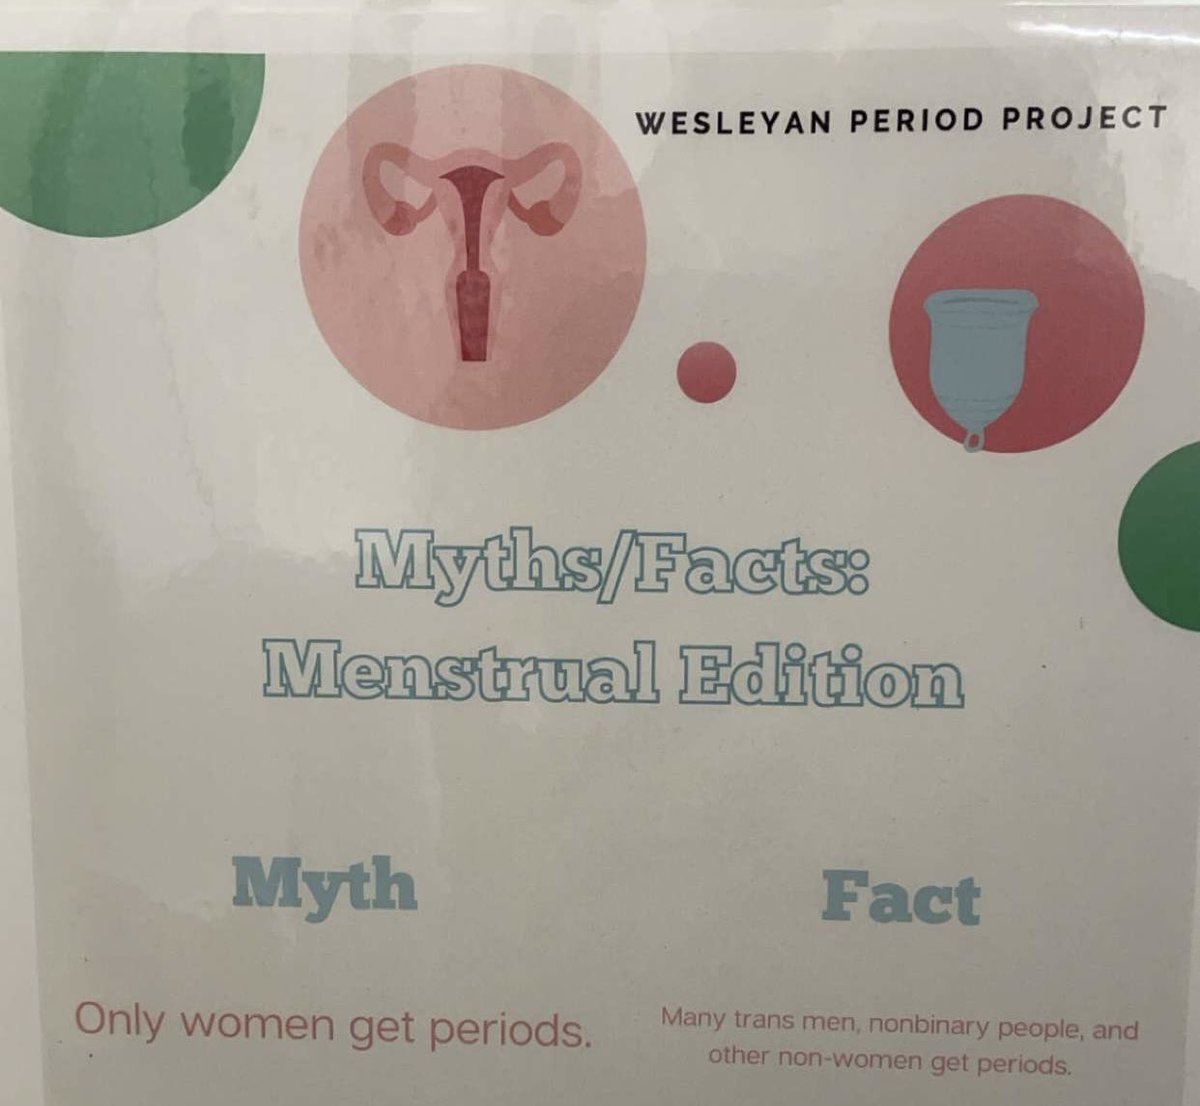 Universities are teaching that it’s a myth that only women get their periods. They’re educating our future leaders. Pure insanity